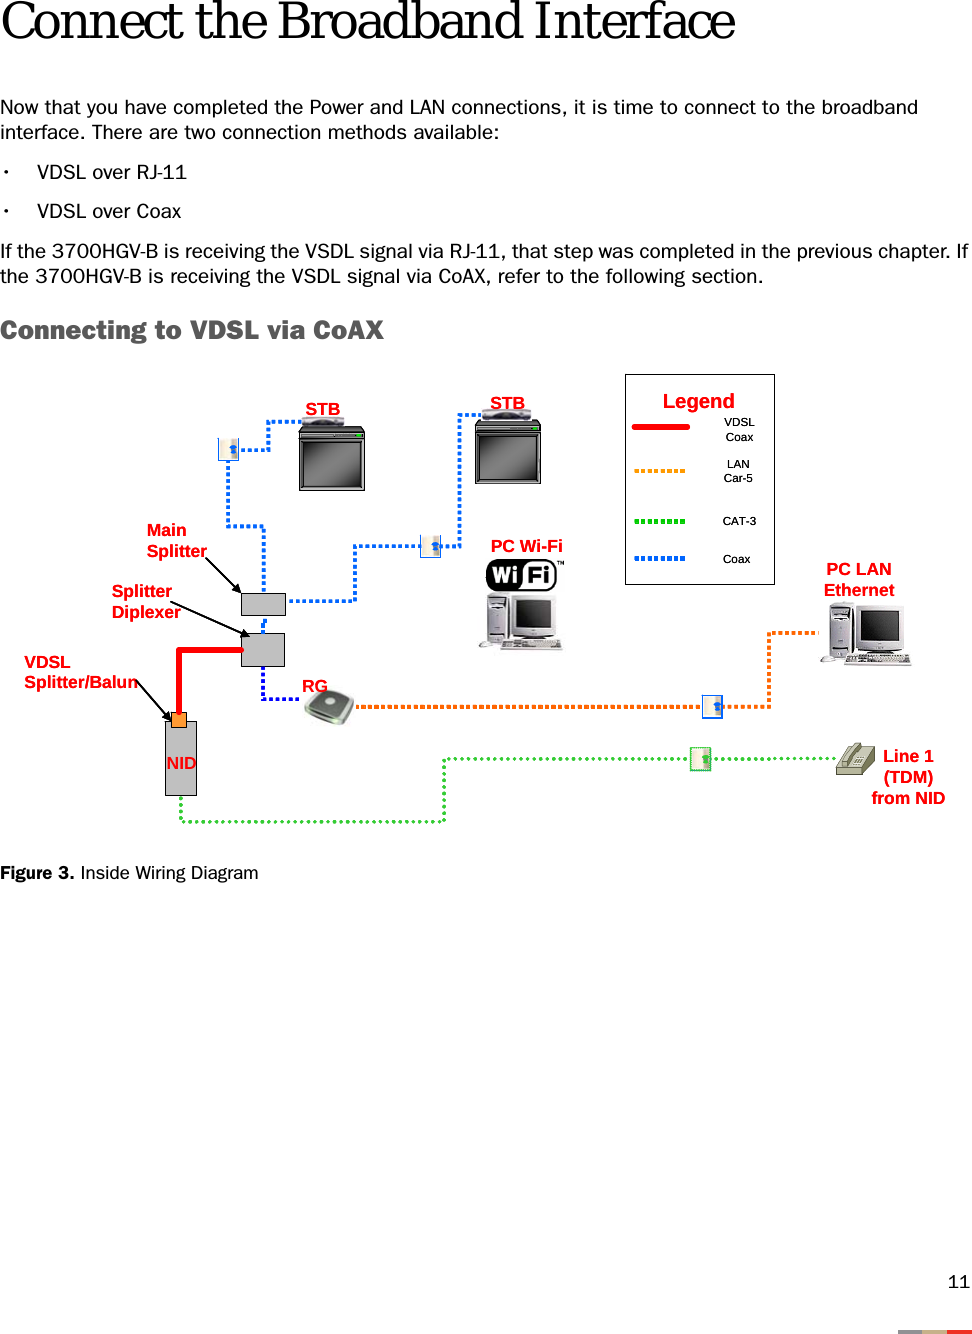 11Connect the Broadband InterfaceNow that you have completed the Power and LAN connections, it is time to connect to the broadband interface. There are two connection methods available:•VDSL over RJ-11• VDSL over CoaxIf the 3700HGV-B is receiving the VSDL signal via RJ-11, that step was completed in the previous chapter. If the 3700HGV-B is receiving the VSDL signal via CoAX, refer to the following section.Connecting to VDSL via CoAXFigure 3. Inside Wiring DiagramNID Line 1 (TDM)from NIDRGSTBSTBVDSL Splitter/BalunLANCar-5CAT-3CoaxVDSL CoaxPC LAN EthernetPC Wi-FiSplitter DiplexerMain SplitterLegendNID Line 1 (TDM)from NIDRGSTBSTBVDSL Splitter/BalunLANCar-5CAT-3CoaxVDSL CoaxPC LAN EthernetPC Wi-FiSplitter DiplexerMain SplitterLegend